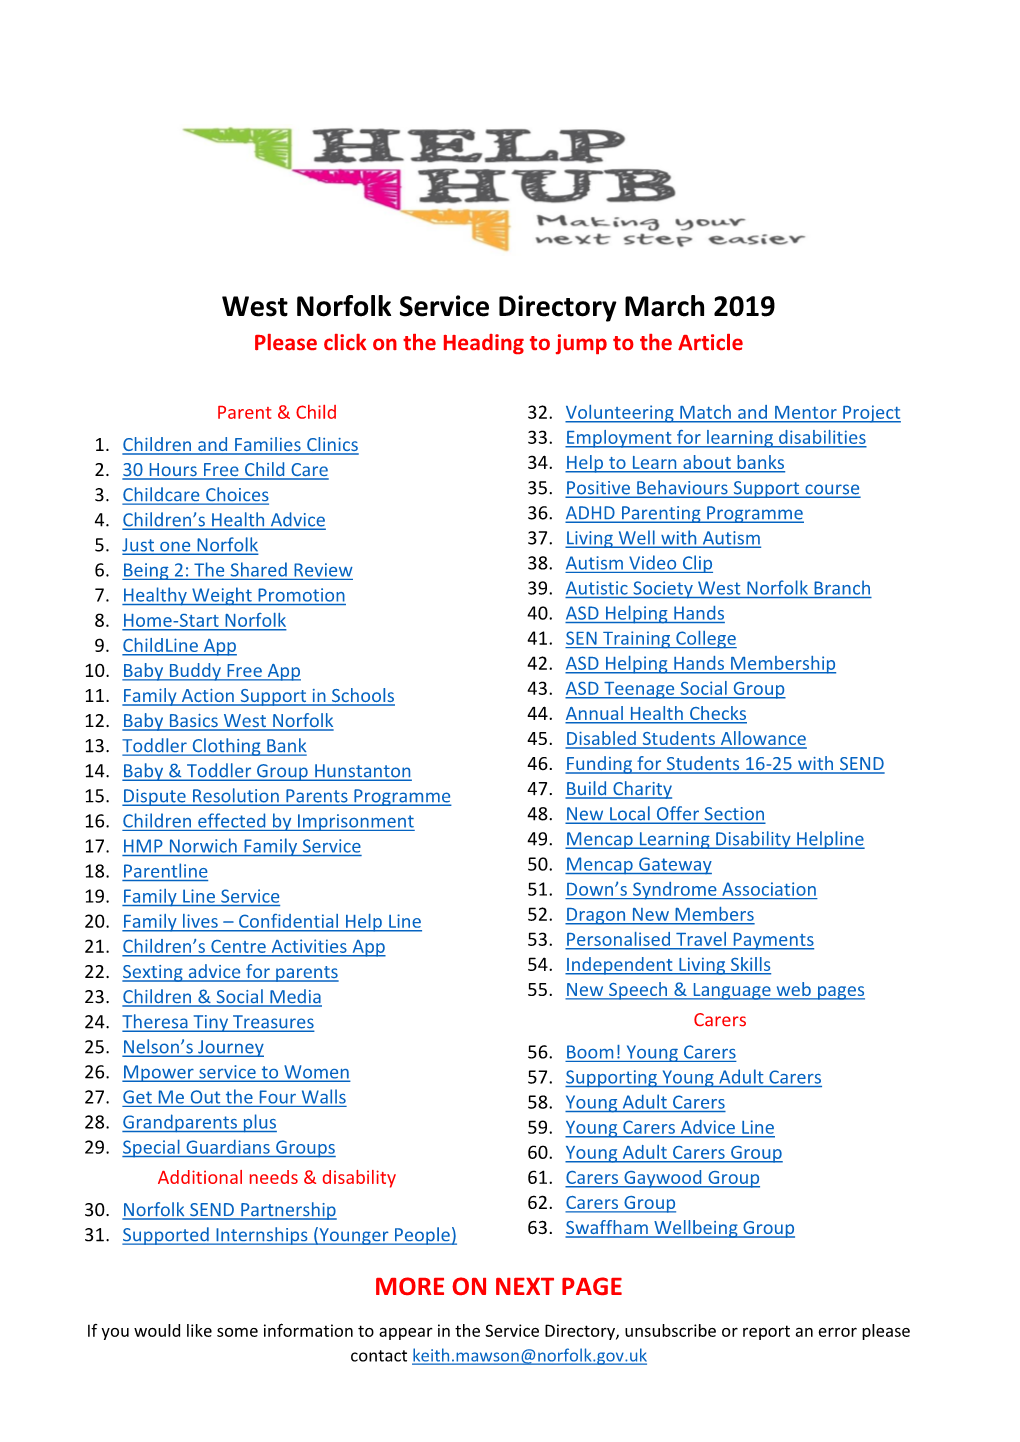 West Norfolk Service Directory March 2019 Please Click on the Heading to Jump to the Article